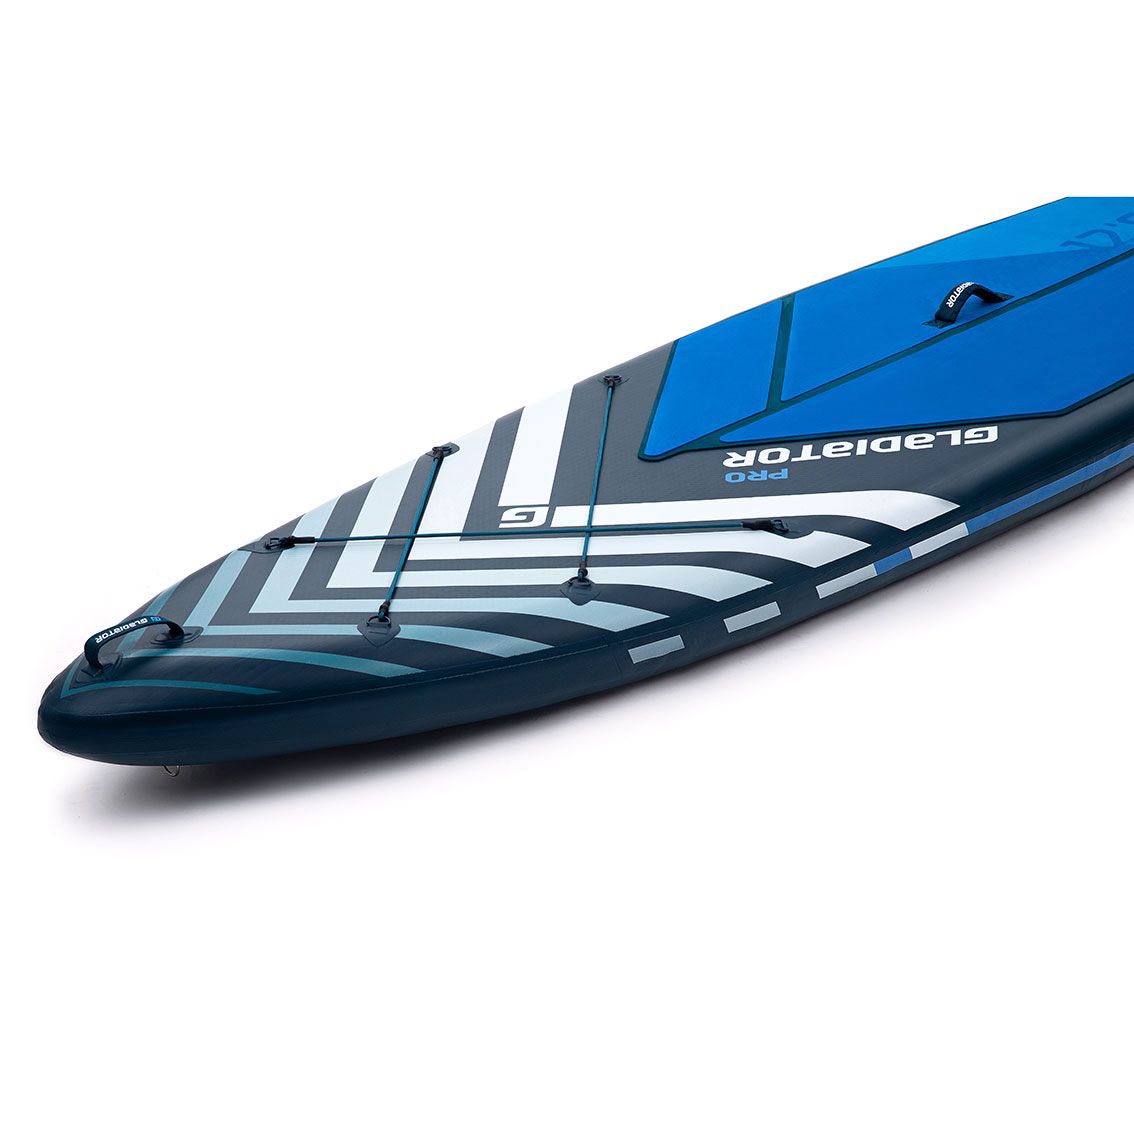 Gladiator Pro 12'6" x 34" x 6" Wide Inflatable Paddleboard